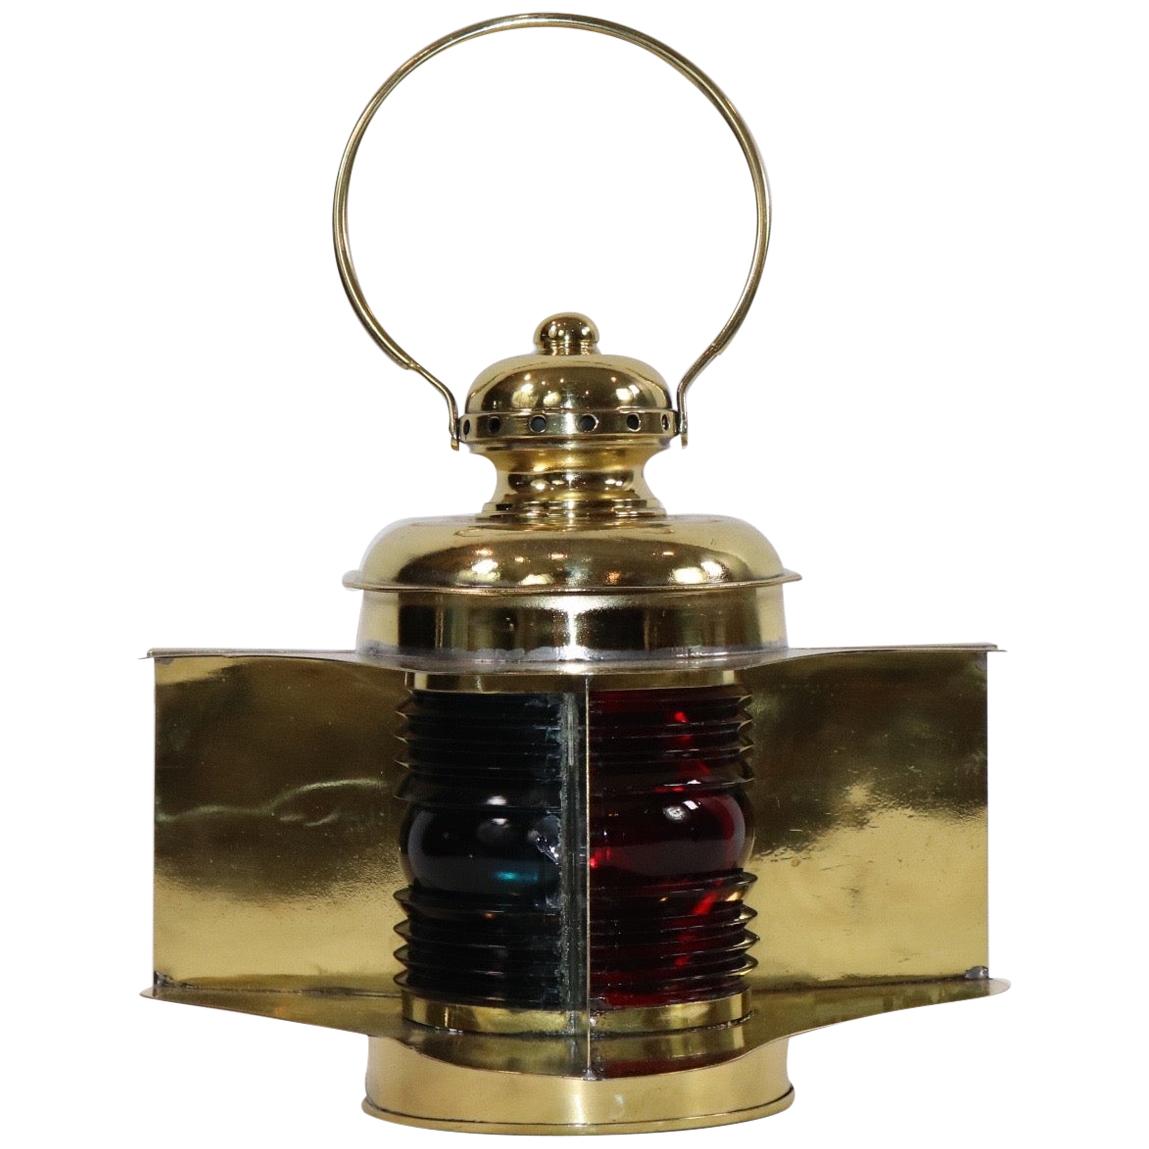 Robert Findlay Marine Lantern from Bow For Sale